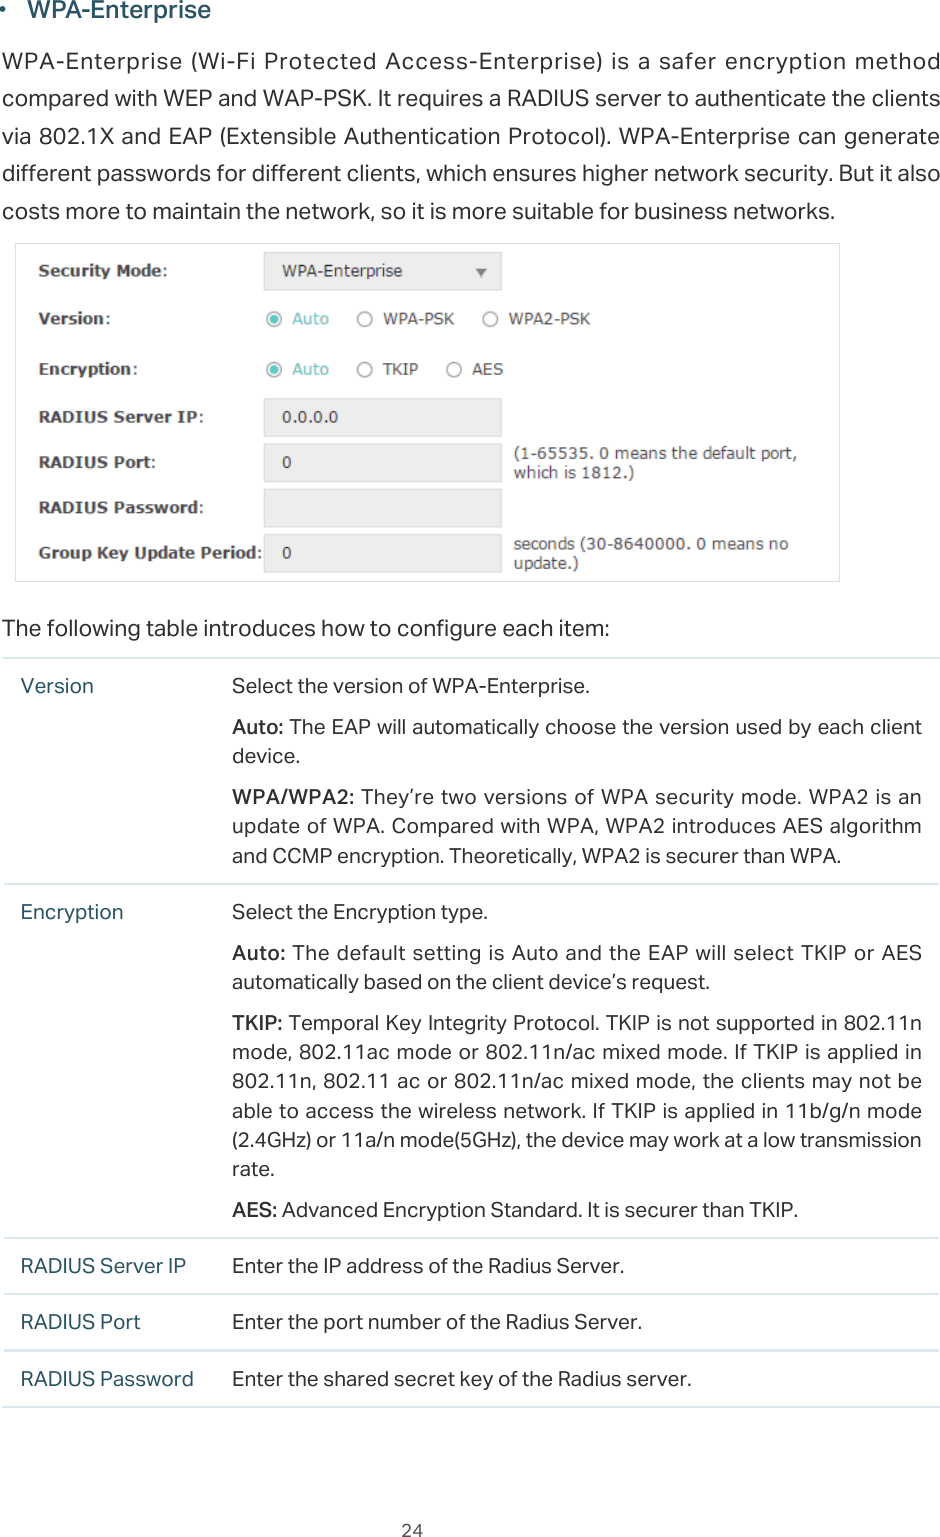  24 ·WPA-EnterpriseWPA-Enterprise (Wi-Fi Protected Access-Enterprise) is a safer encryption method compared with WEP and WAP-PSK. It requires a RADIUS server to authenticate the clients via 802.1X and EAP (Extensible Authentication Protocol). WPA-Enterprise can generate different passwords for different clients, which ensures higher network security. But it also costs more to maintain the network, so it is more suitable for business networks.The following table introduces how to configure each item:Version Select the version of WPA-Enterprise.Auto: The EAP will automatically choose the version used by each client device.WPA/WPA2: They’re two versions of WPA security mode. WPA2 is an update of WPA. Compared with WPA, WPA2 introduces AES algorithm and CCMP encryption. Theoretically, WPA2 is securer than WPA.Encryption Select the Encryption type.Auto: The default setting is Auto and the EAP will select TKIP or AES automatically based on the client device’s request.TKIP: Temporal Key Integrity Protocol. TKIP is not supported in 802.11n mode, 802.11ac mode or 802.11n/ac mixed mode. If TKIP is applied in 802.11n, 802.11 ac or 802.11n/ac mixed mode, the clients may not be able to access the wireless network. If TKIP is applied in 11b/g/n mode (2.4GHz) or 11a/n mode(5GHz), the device may work at a low transmission rate.AES: Advanced Encryption Standard. It is securer than TKIP.RADIUS Server IP Enter the IP address of the Radius Server.RADIUS Port Enter the port number of the Radius Server.RADIUS Password Enter the shared secret key of the Radius server.